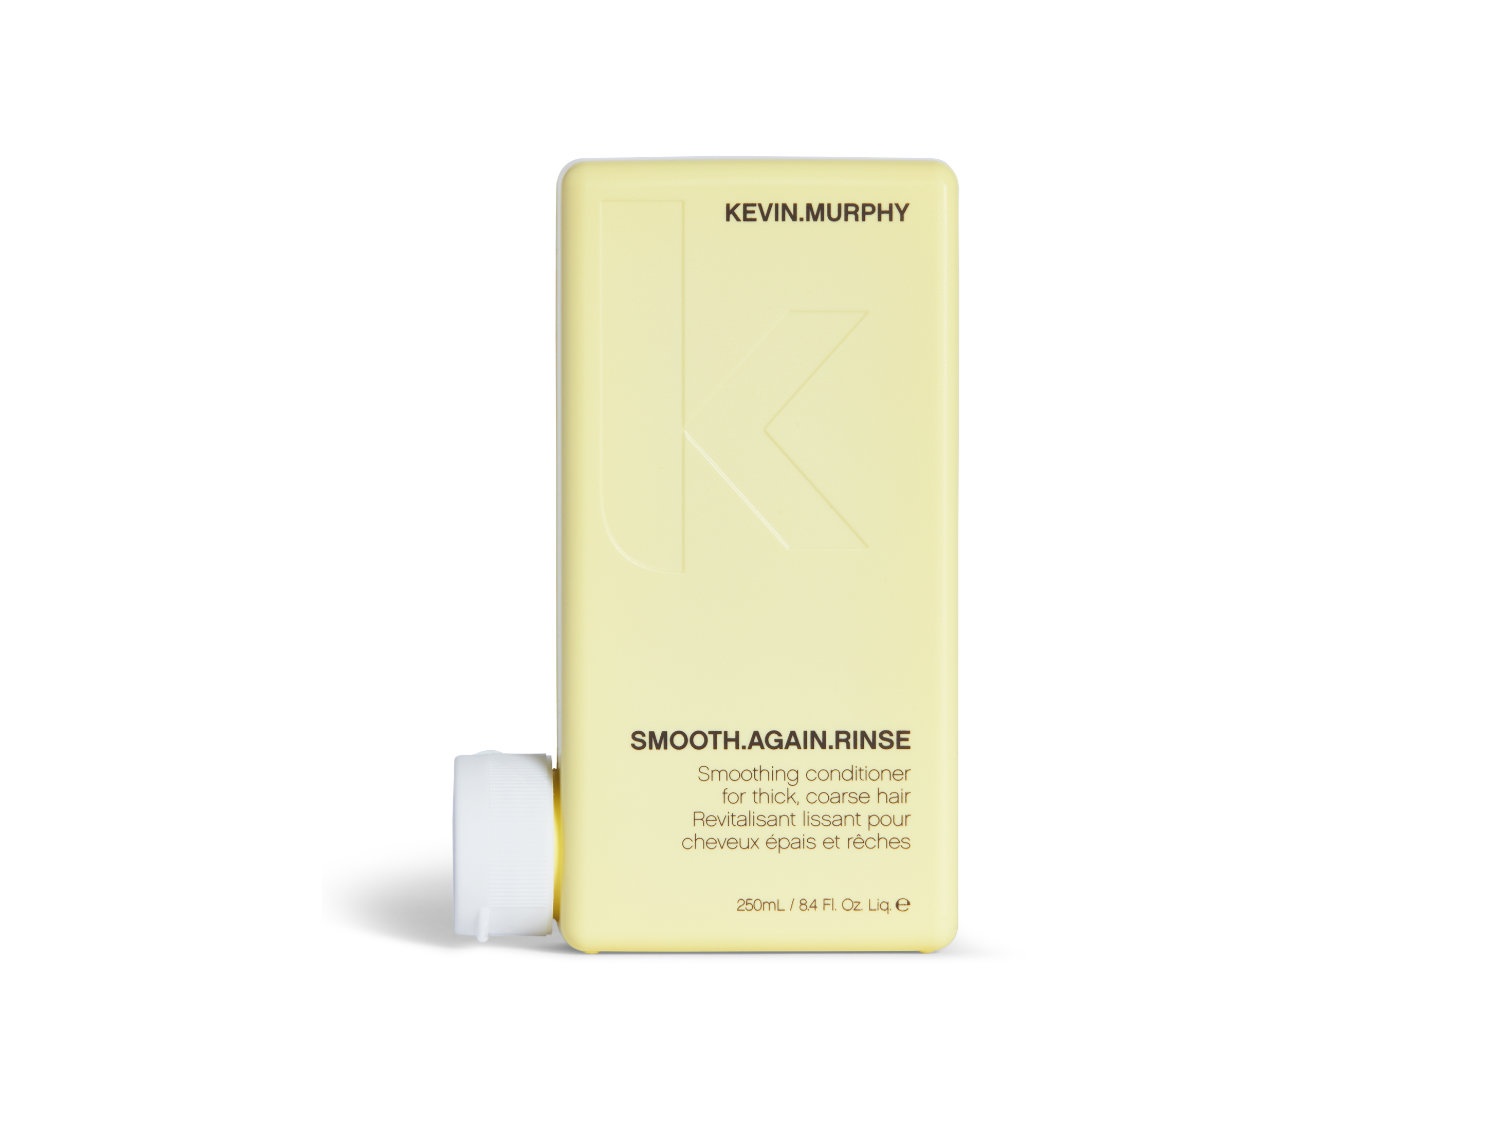 Arma Beauty - Kevin Murphy - SMOOTH.AGAIN.RINSE